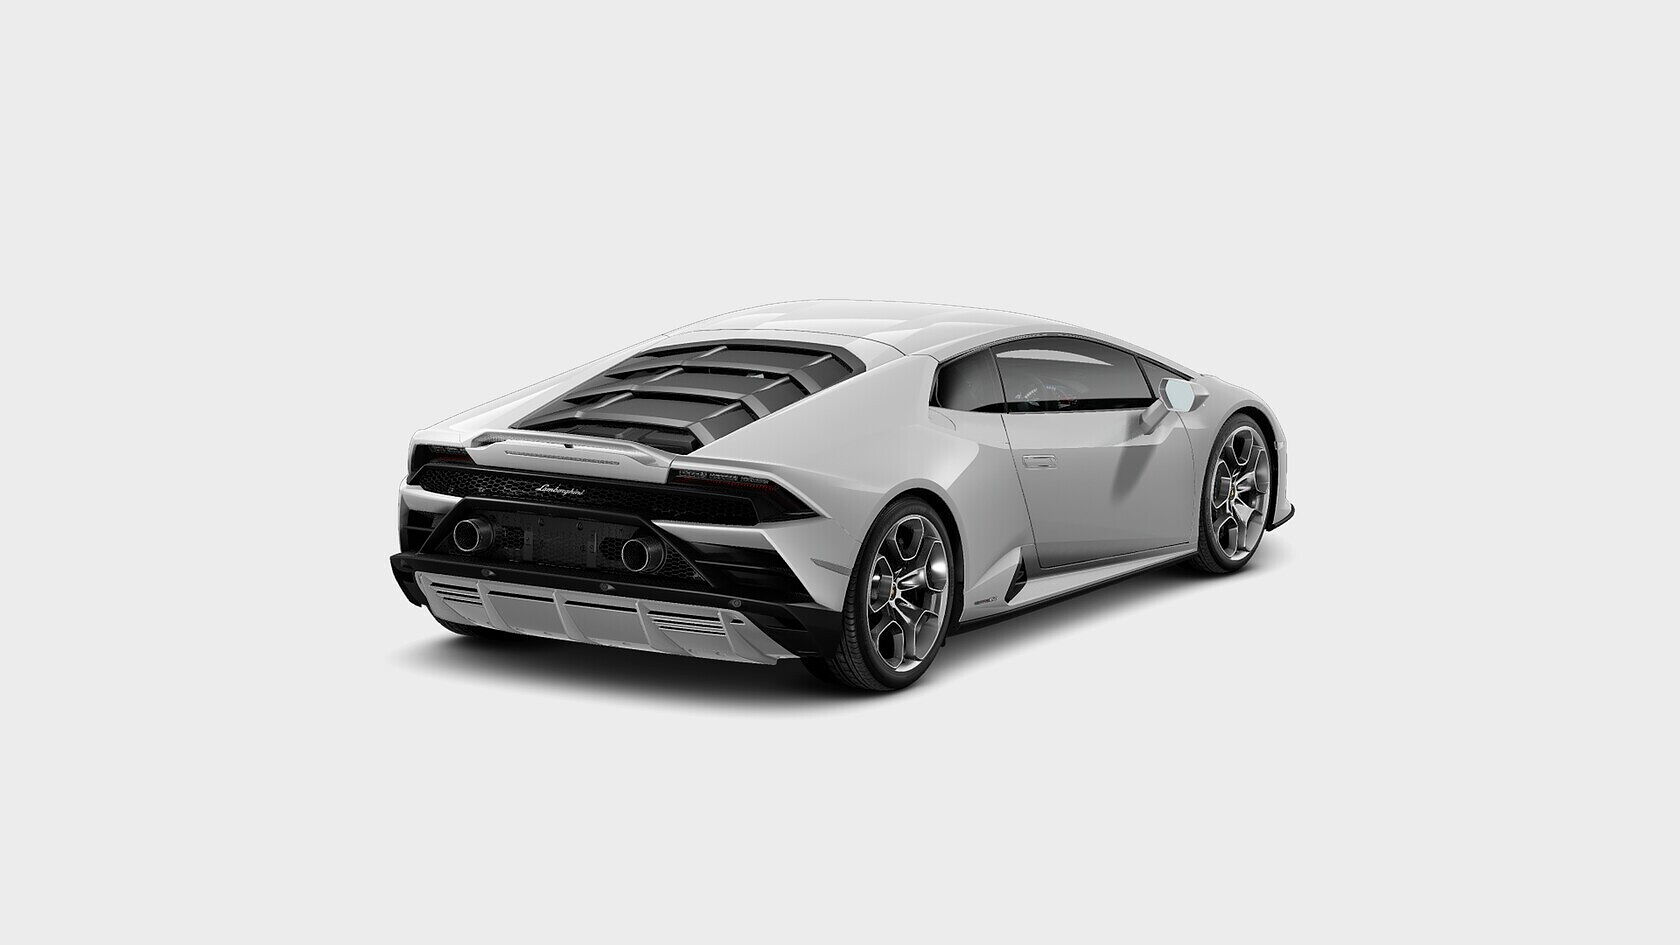 Lamborghini Huracan  Reviews, price and specs on all variations